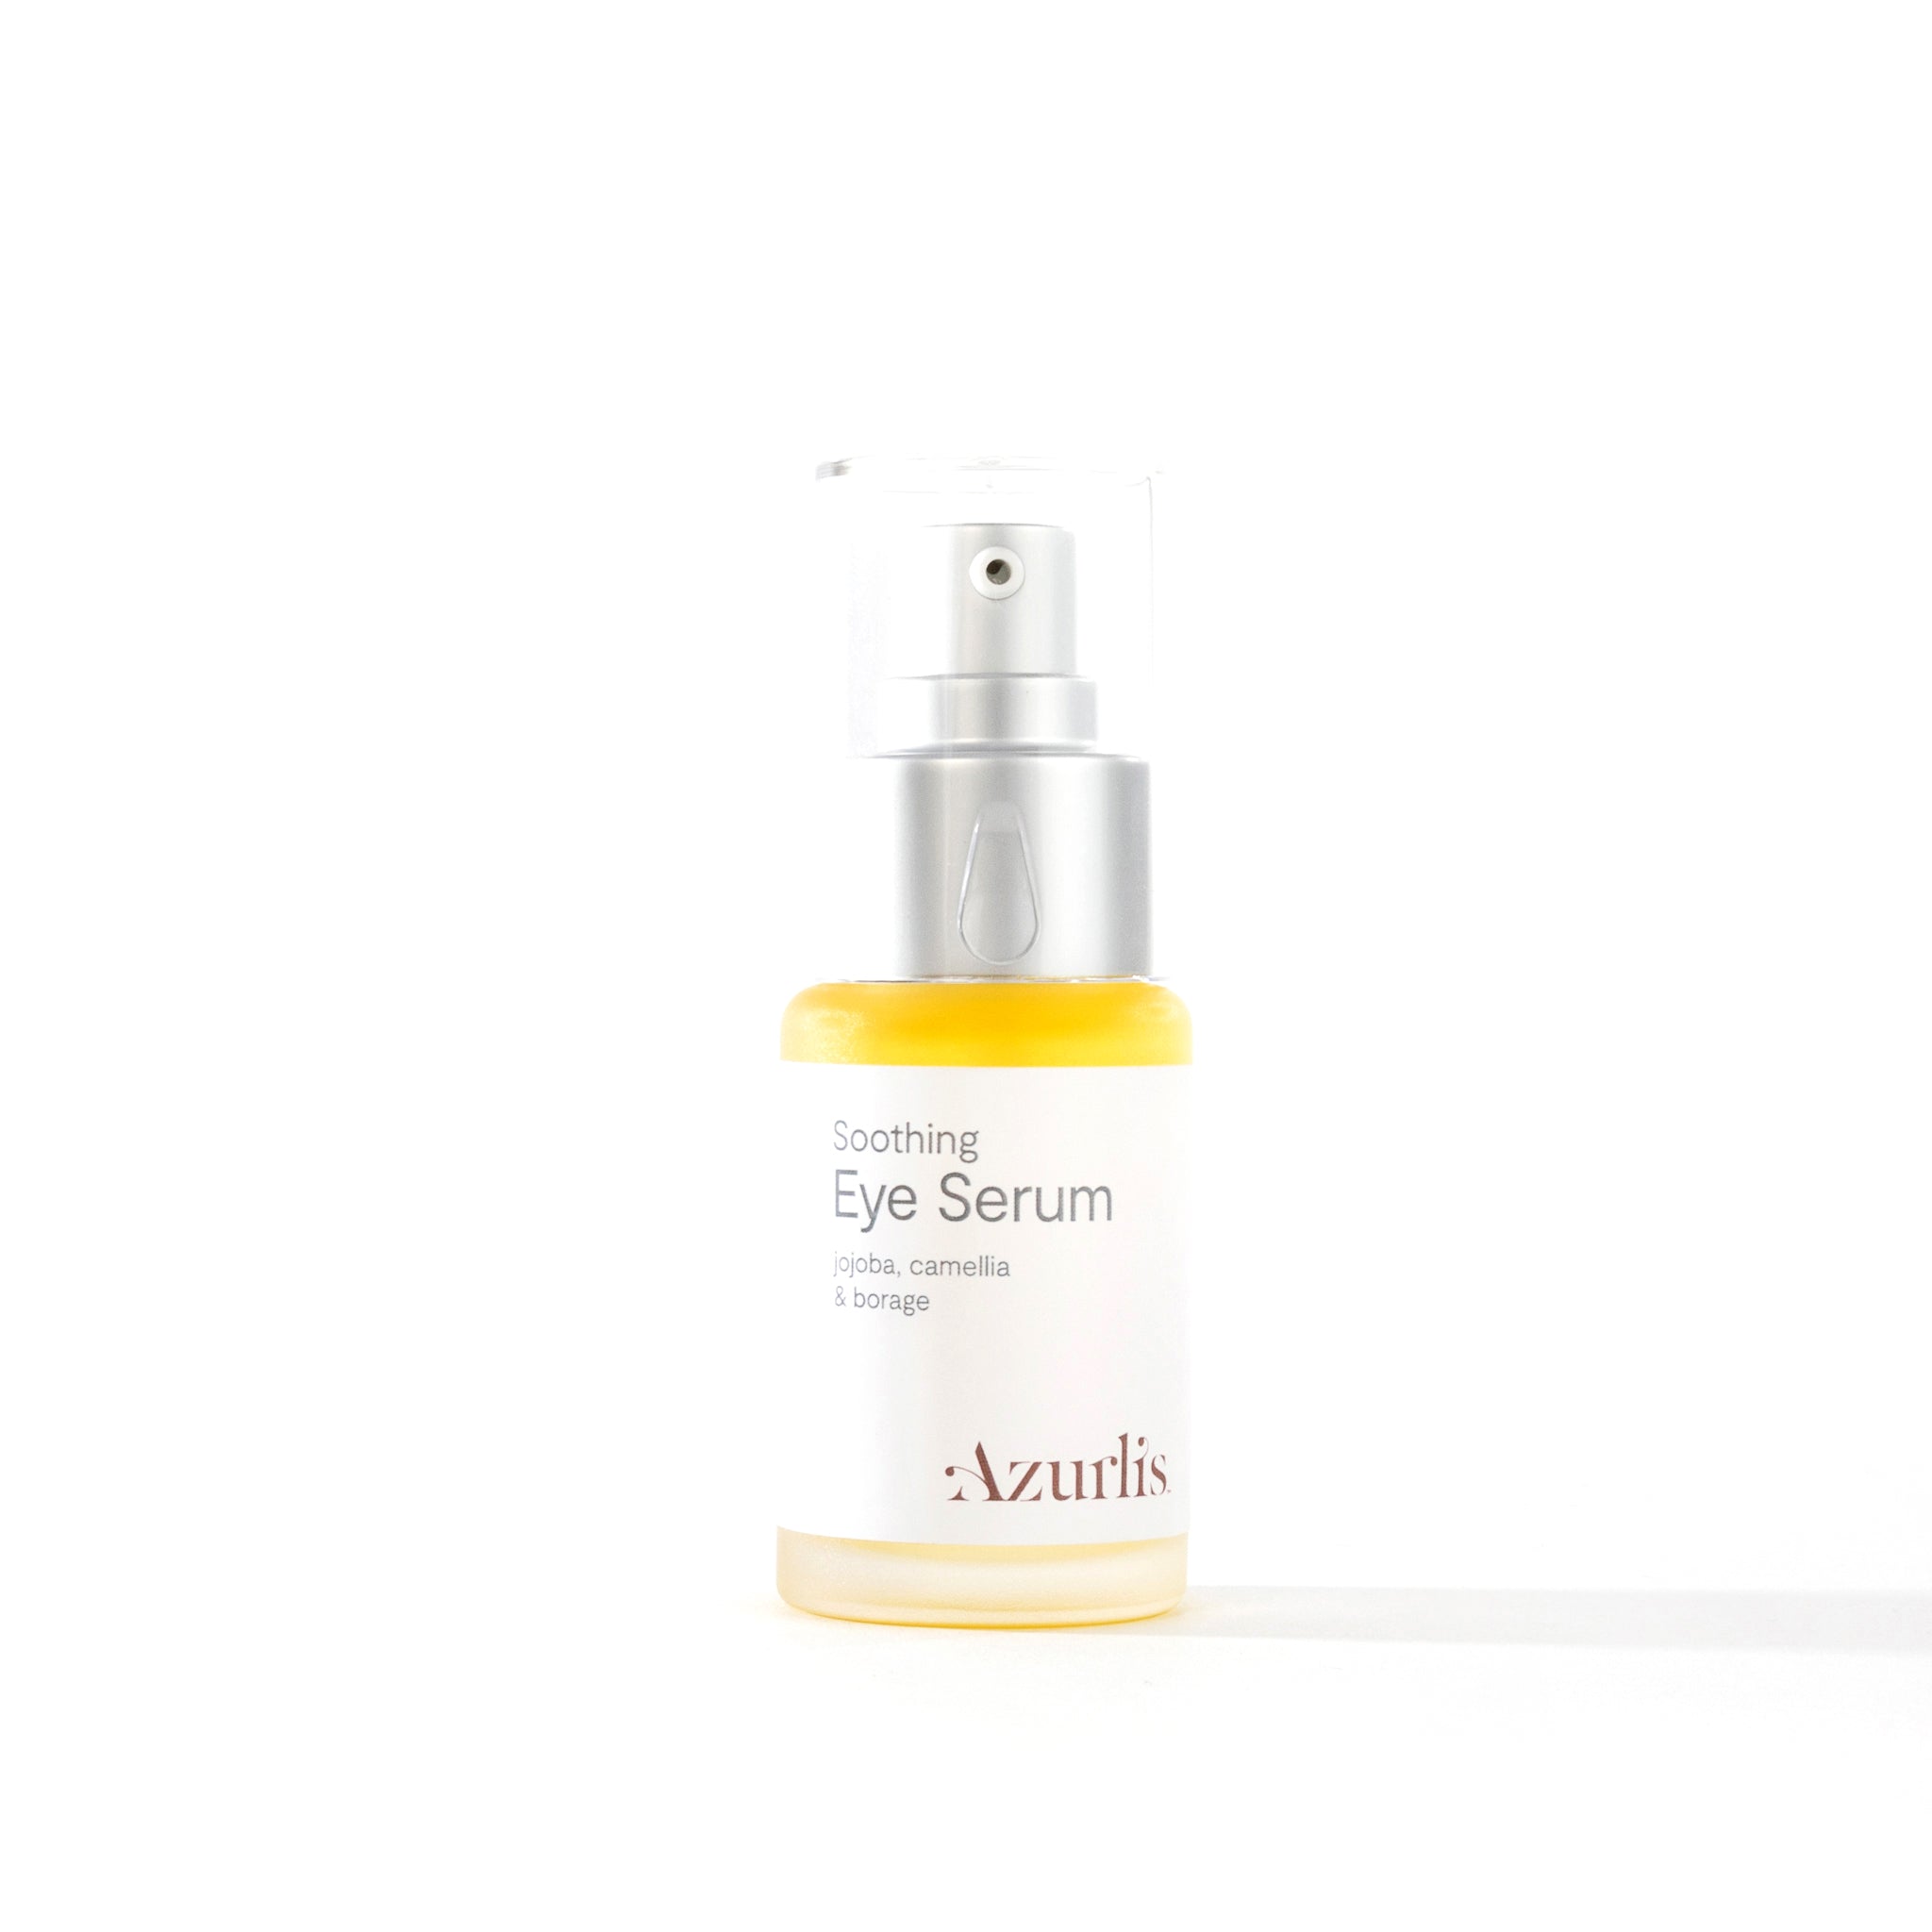 Azurlis™ Soothing Eye Serum 30ml is truly nourishing and shielding, rich in vitamins A, B and C anti-oxidants. This is a wonderful product that can be used as a daily protector or a night feeder for the delicate skin around the eyes.